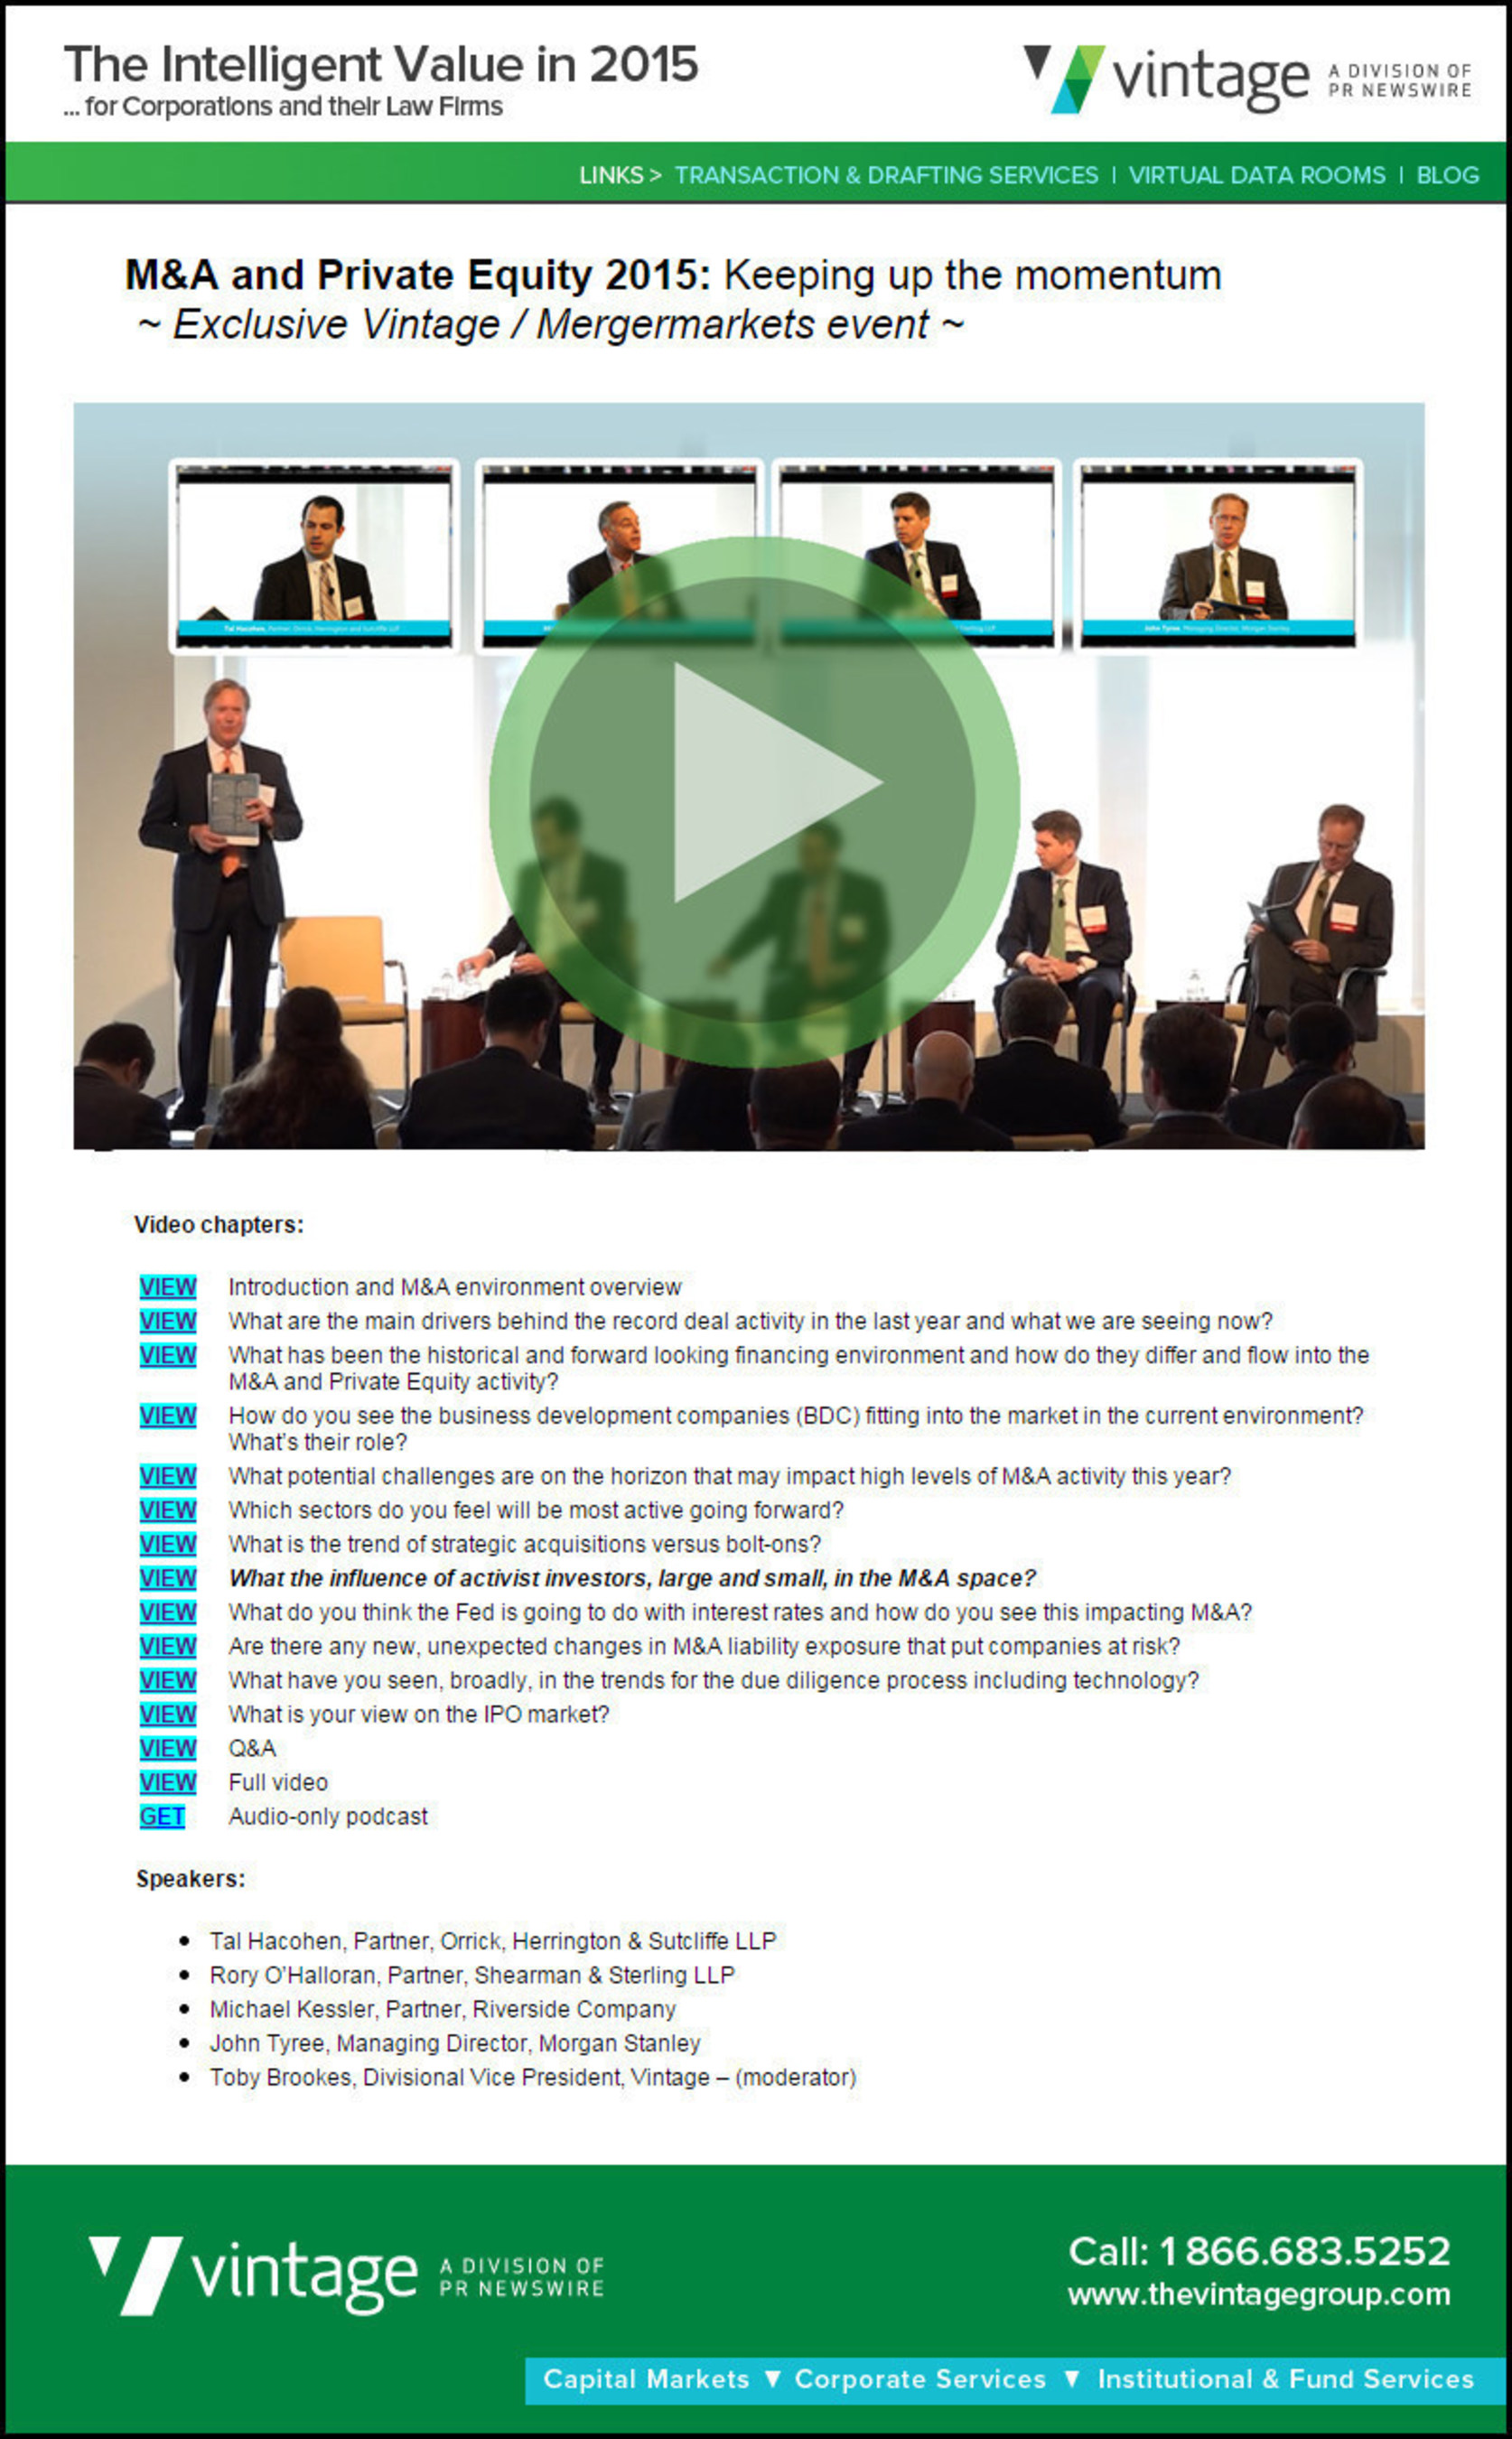 VIDEO NOW AVAILABLE: M&A experts answer 12 questions on the current business environment for mergers and acquisitions.